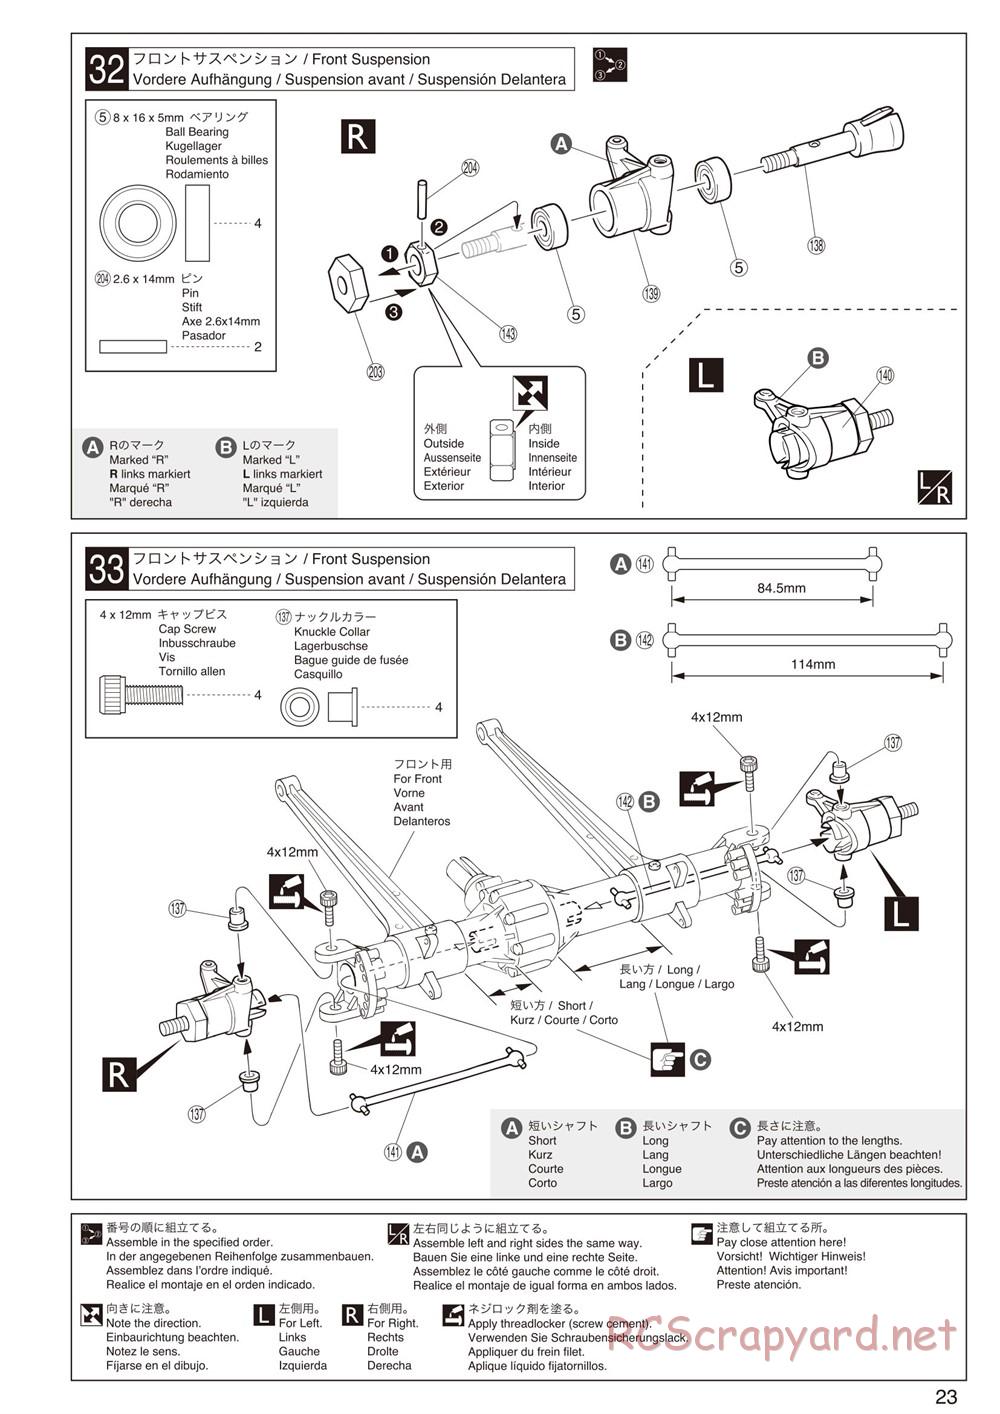 Kyosho - Mad Force Cruiser - Manual - Page 23